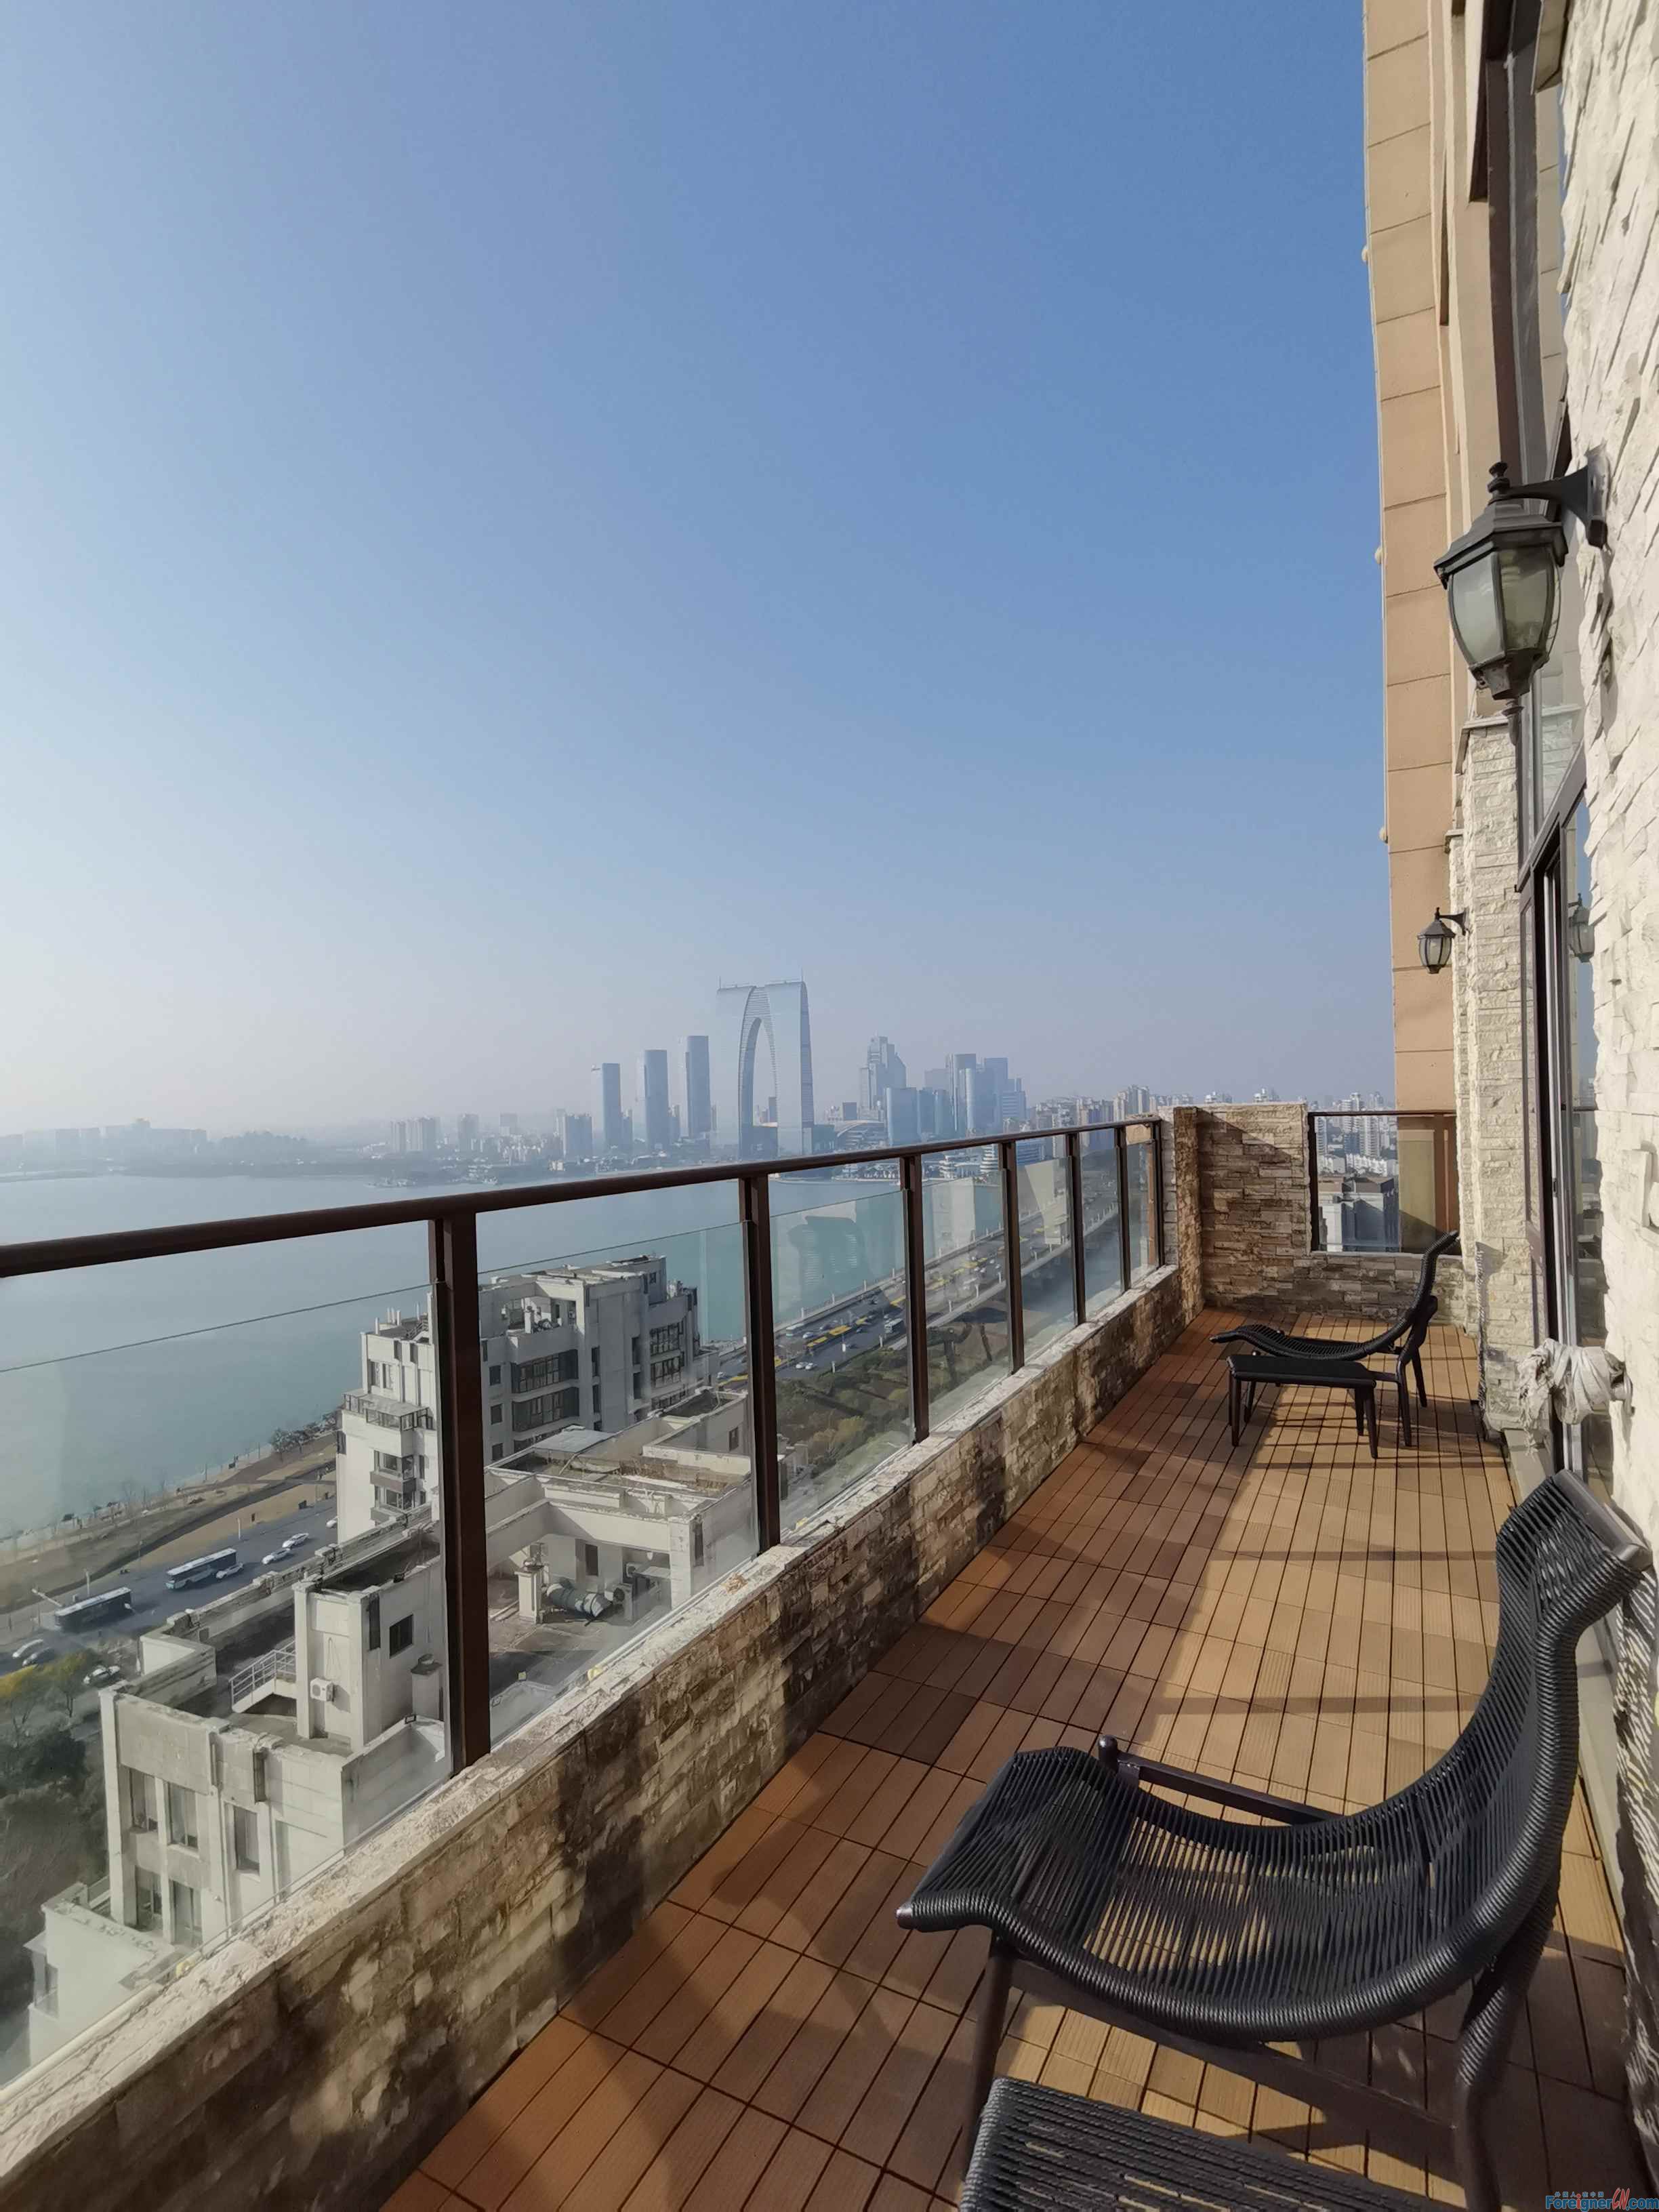 Open Balcony / Jinji Lakeview !!  Bayside Garden -- 3 rooms and 1 bath|130sqms \ Heating and Central A/C \ Close to Expo Center; Jinji Lake and Metro line1 